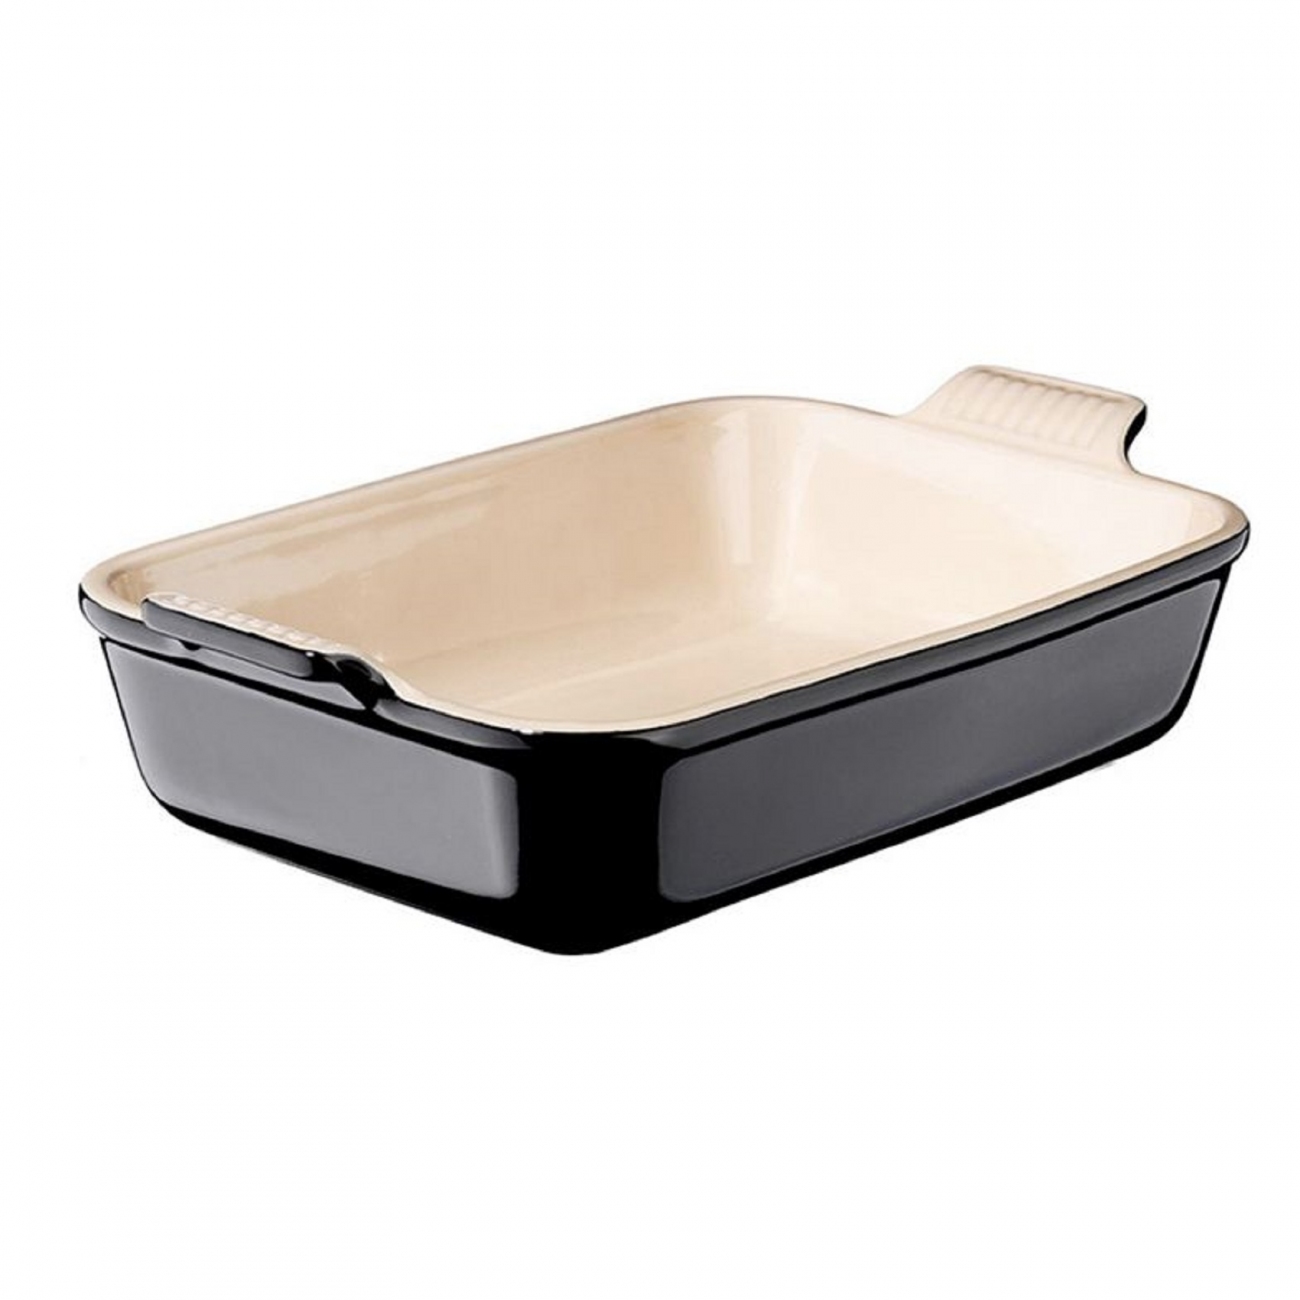 houding Beschaven Harde wind Le Creuset Rectangular Traditional Pyrex Dish 26 glossy black